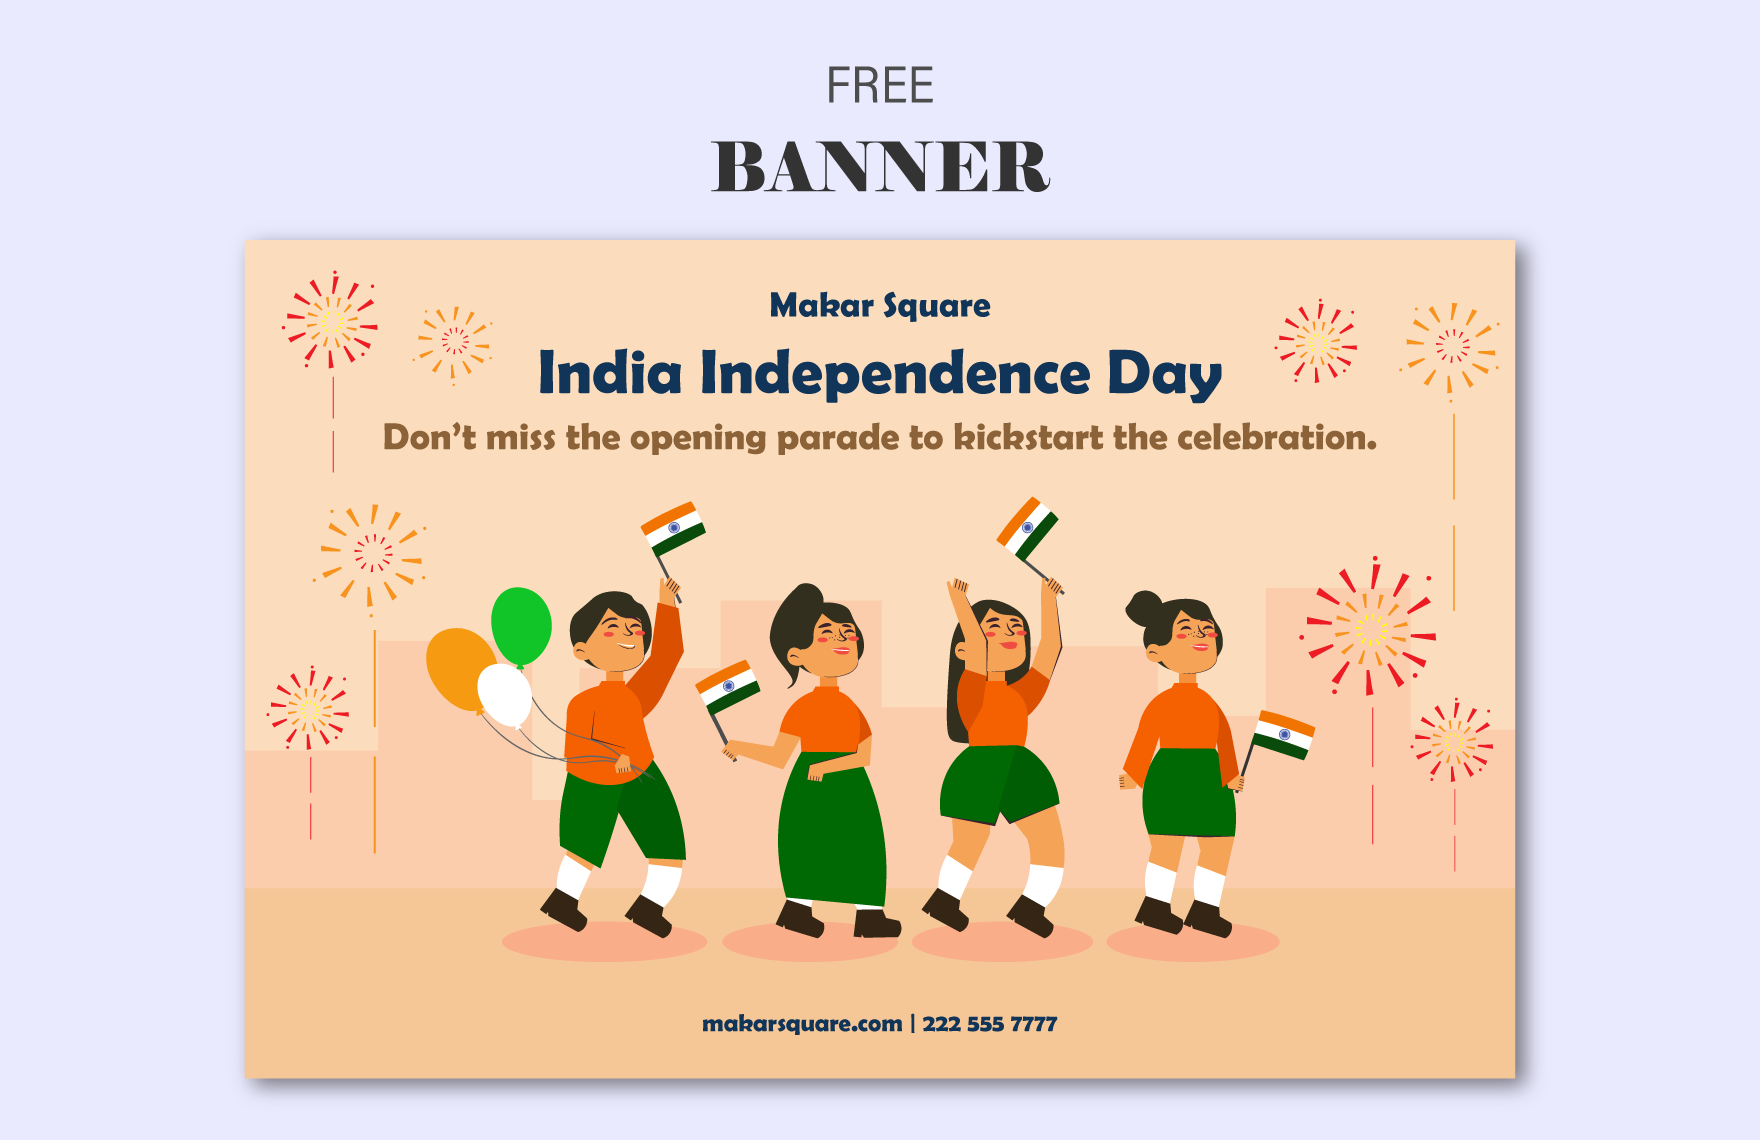 India Independence Day Banner Template in PDF, Illustrator, SVG, JPG